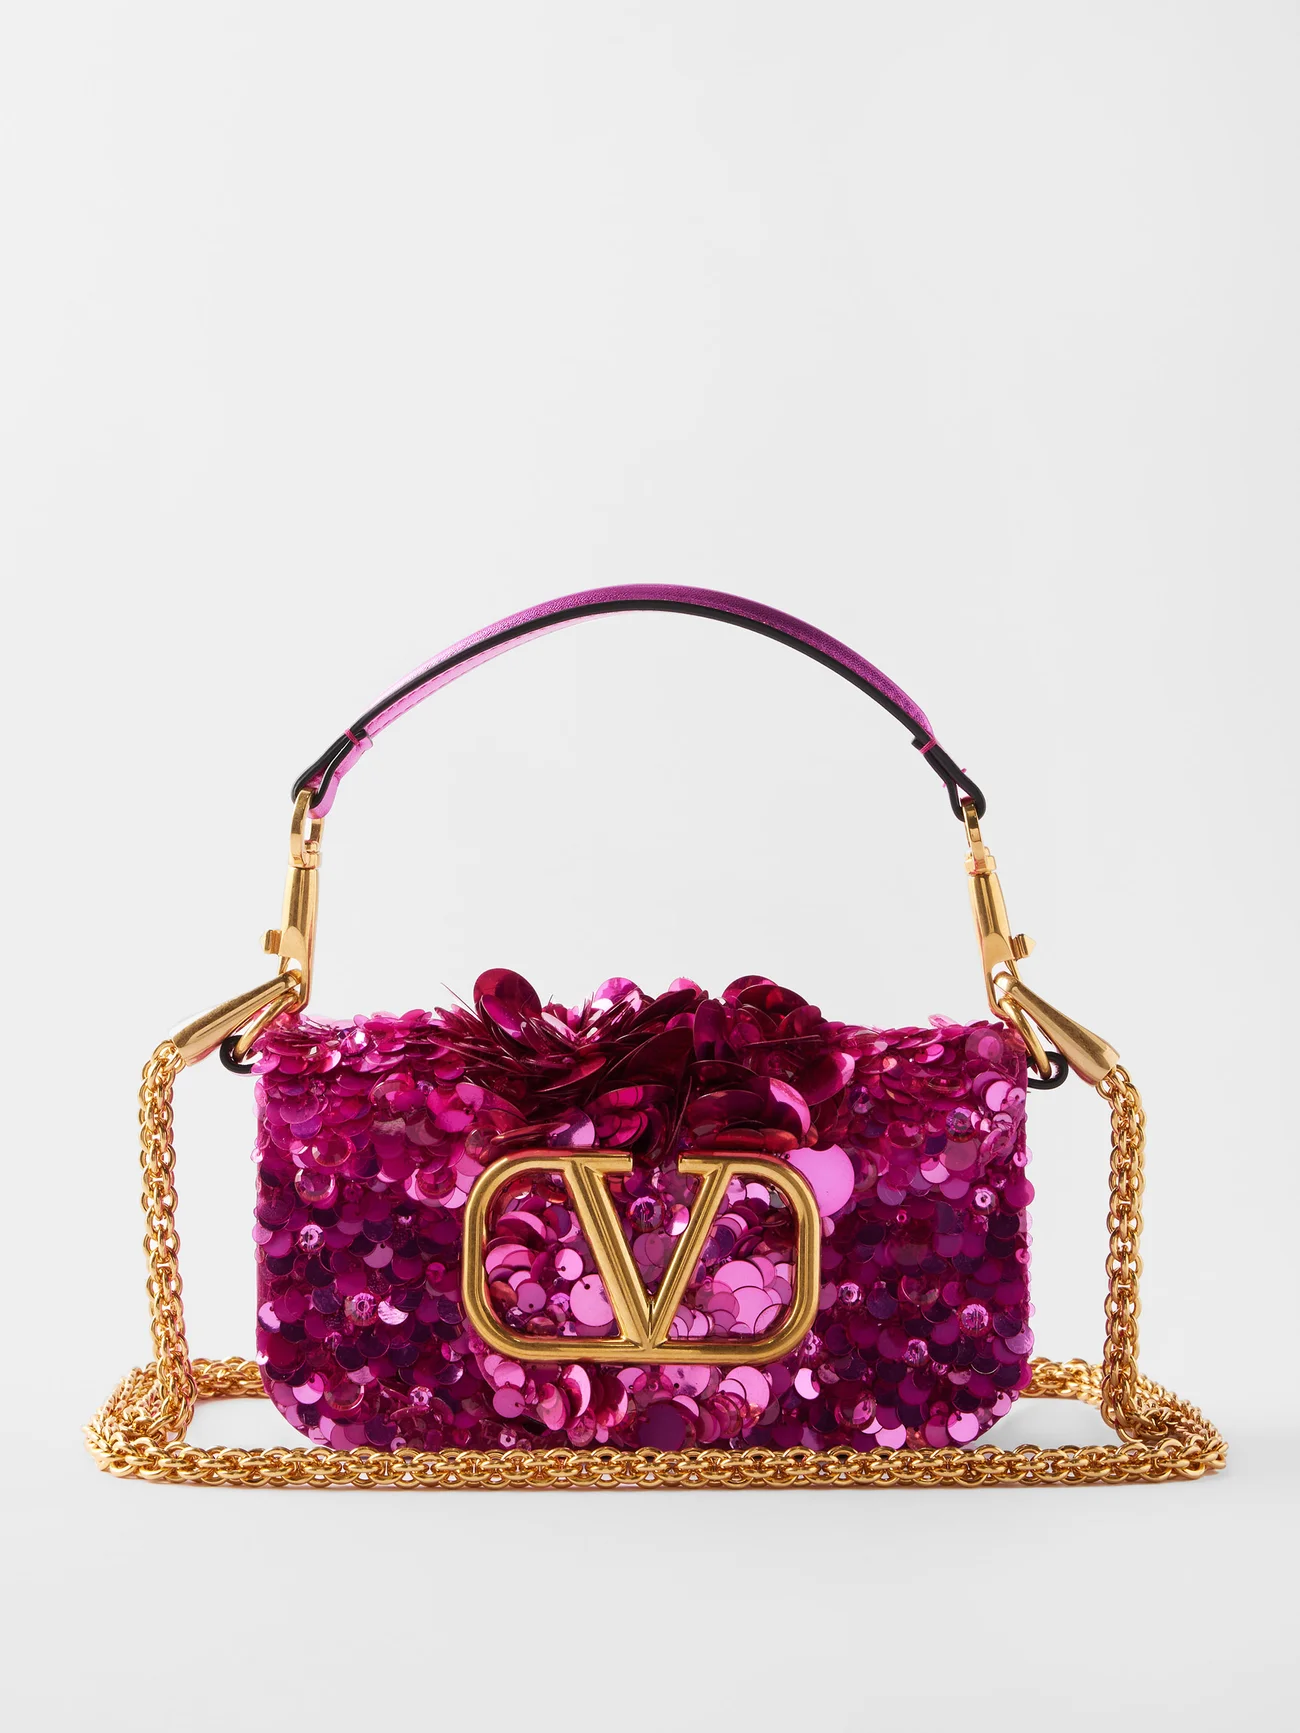 The 3 Musketeers: LV Top Handle Bags That Are Worth Every Penny! 